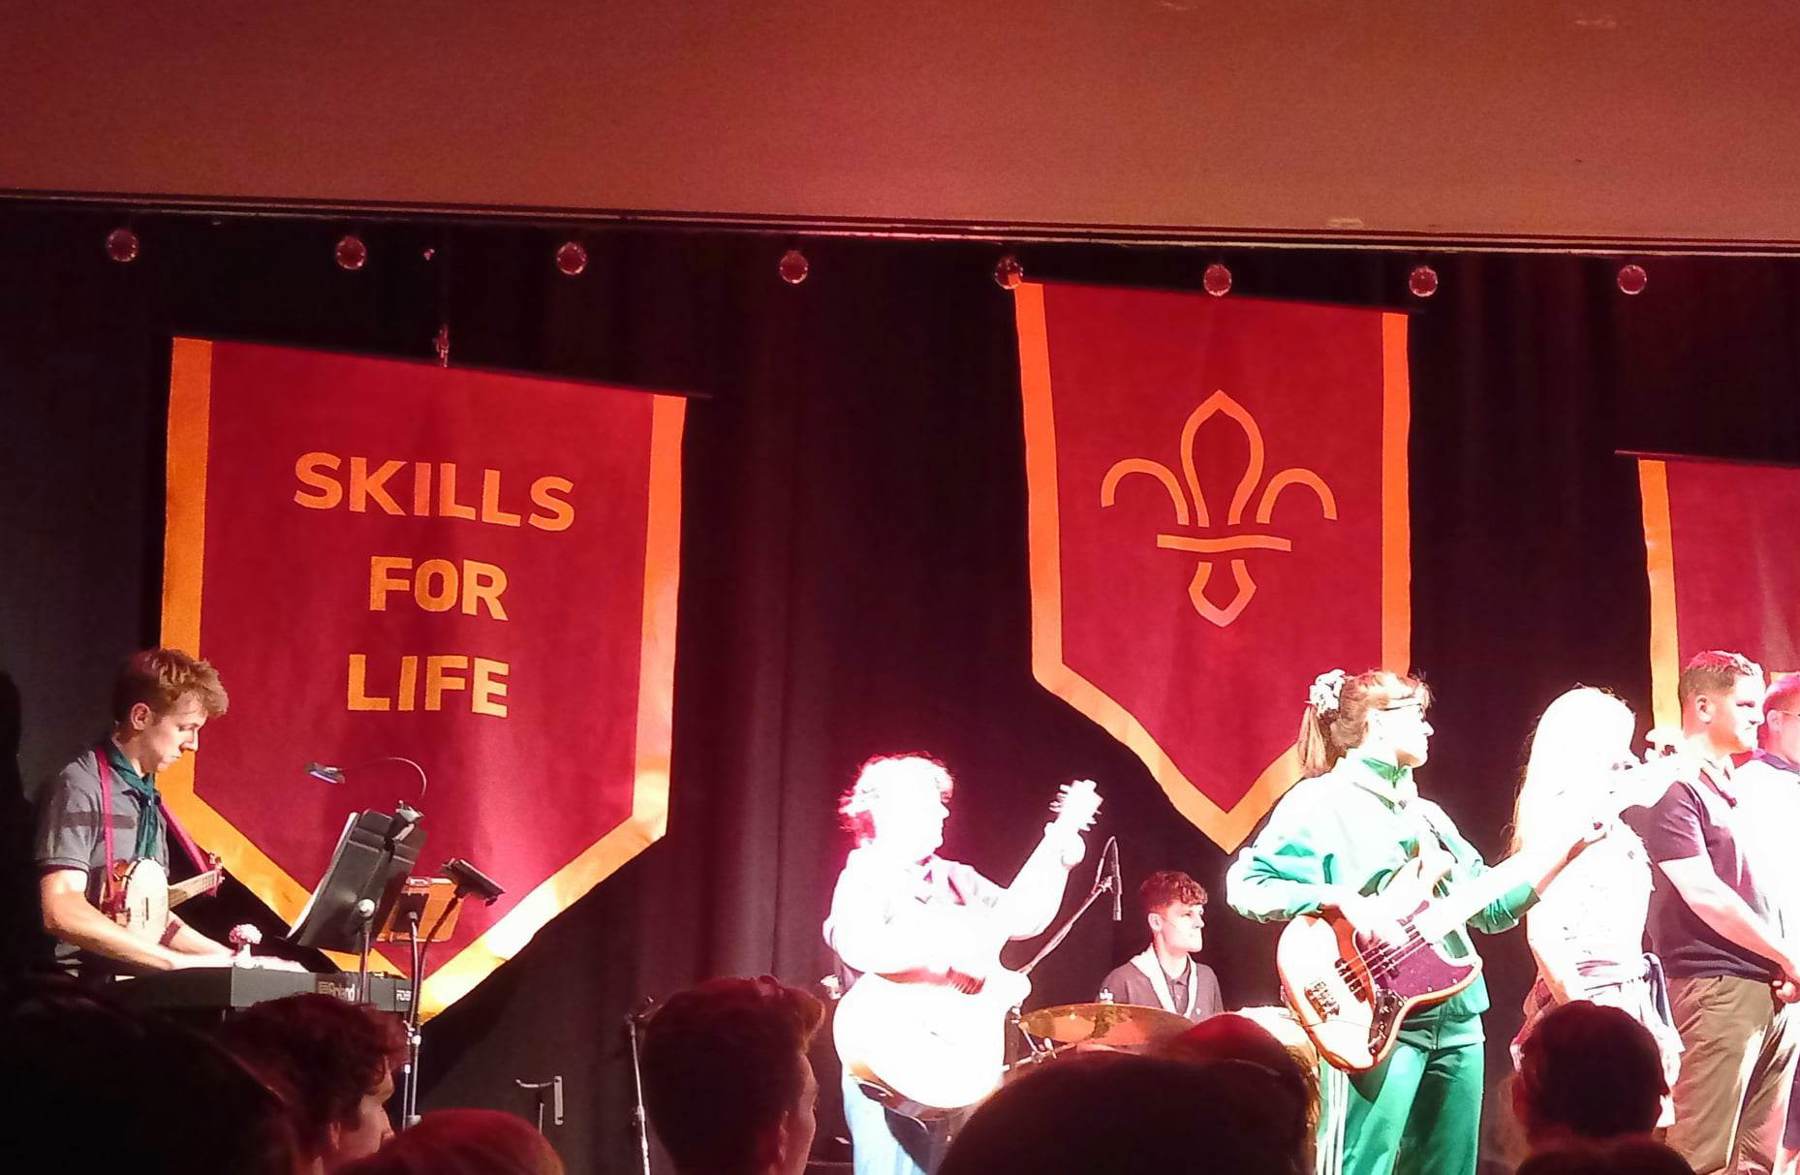 Five musicians are stood on a stage with banners behind their heads. One banner says Skills for Life and the other has a fleur-de-lis.